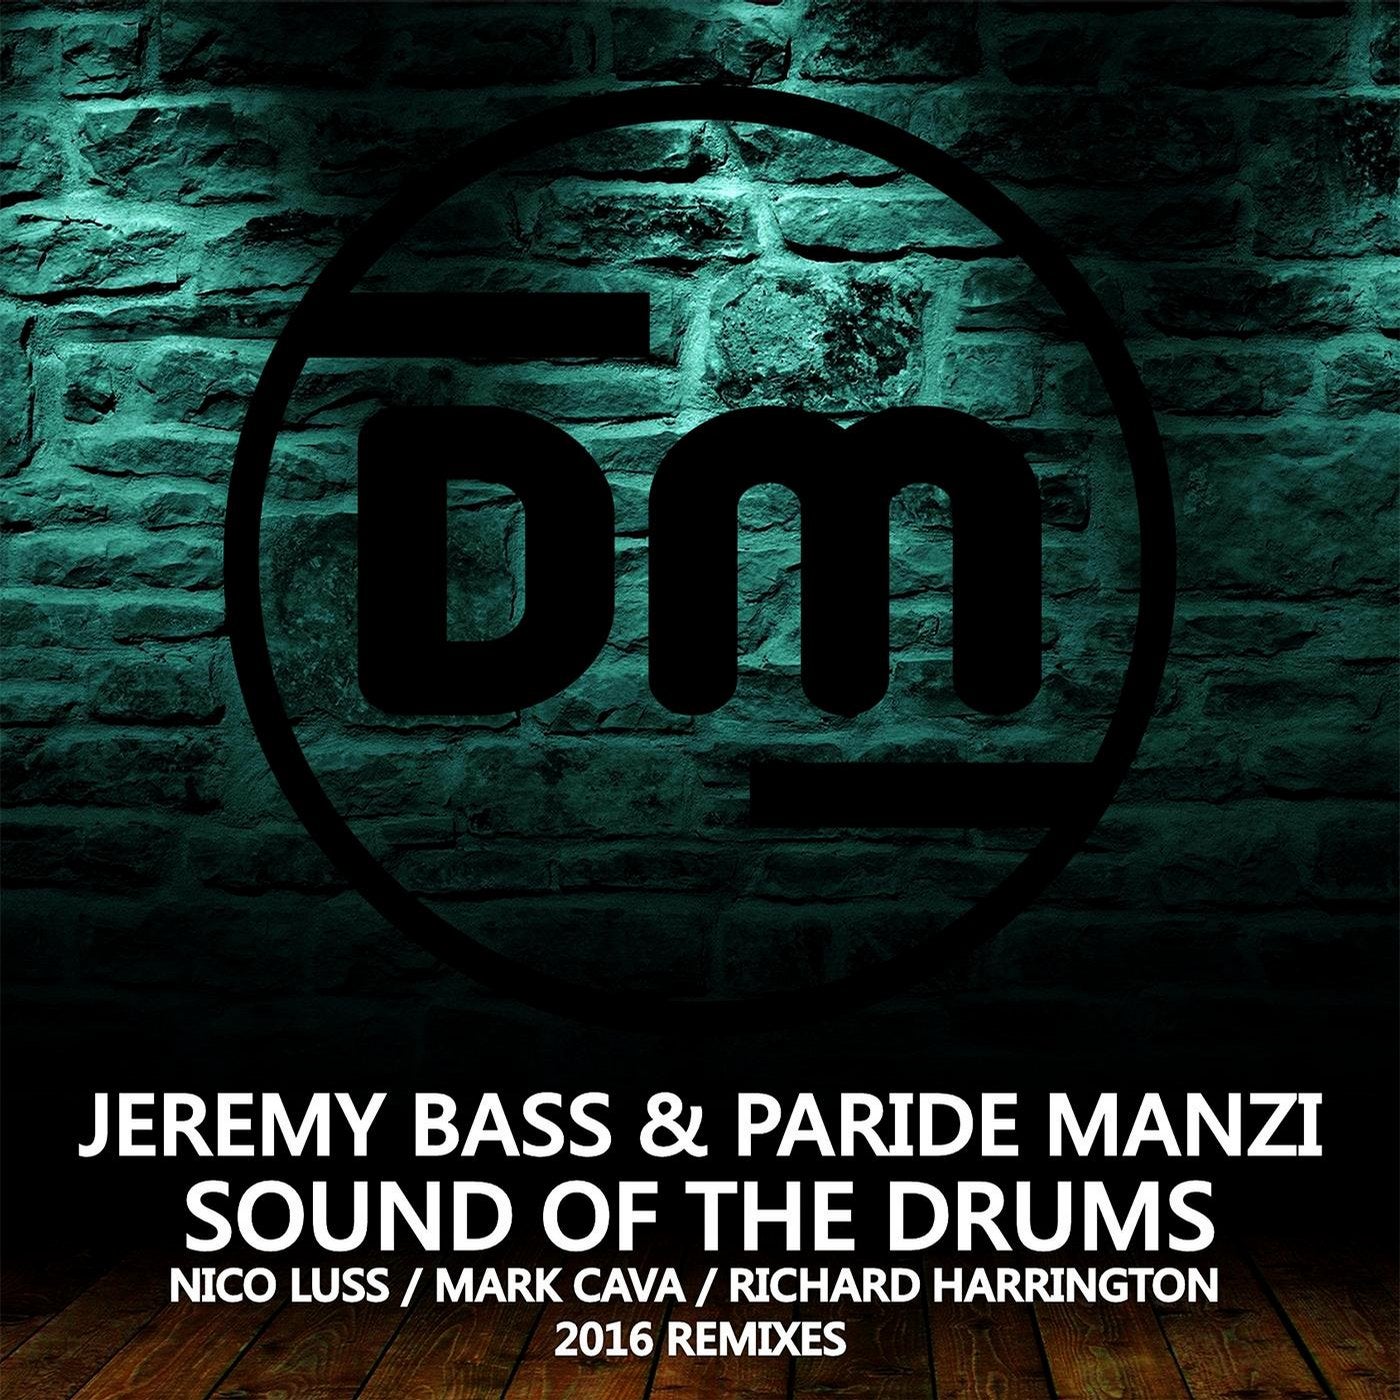 Sound Of The Drums (2016 Remixes)